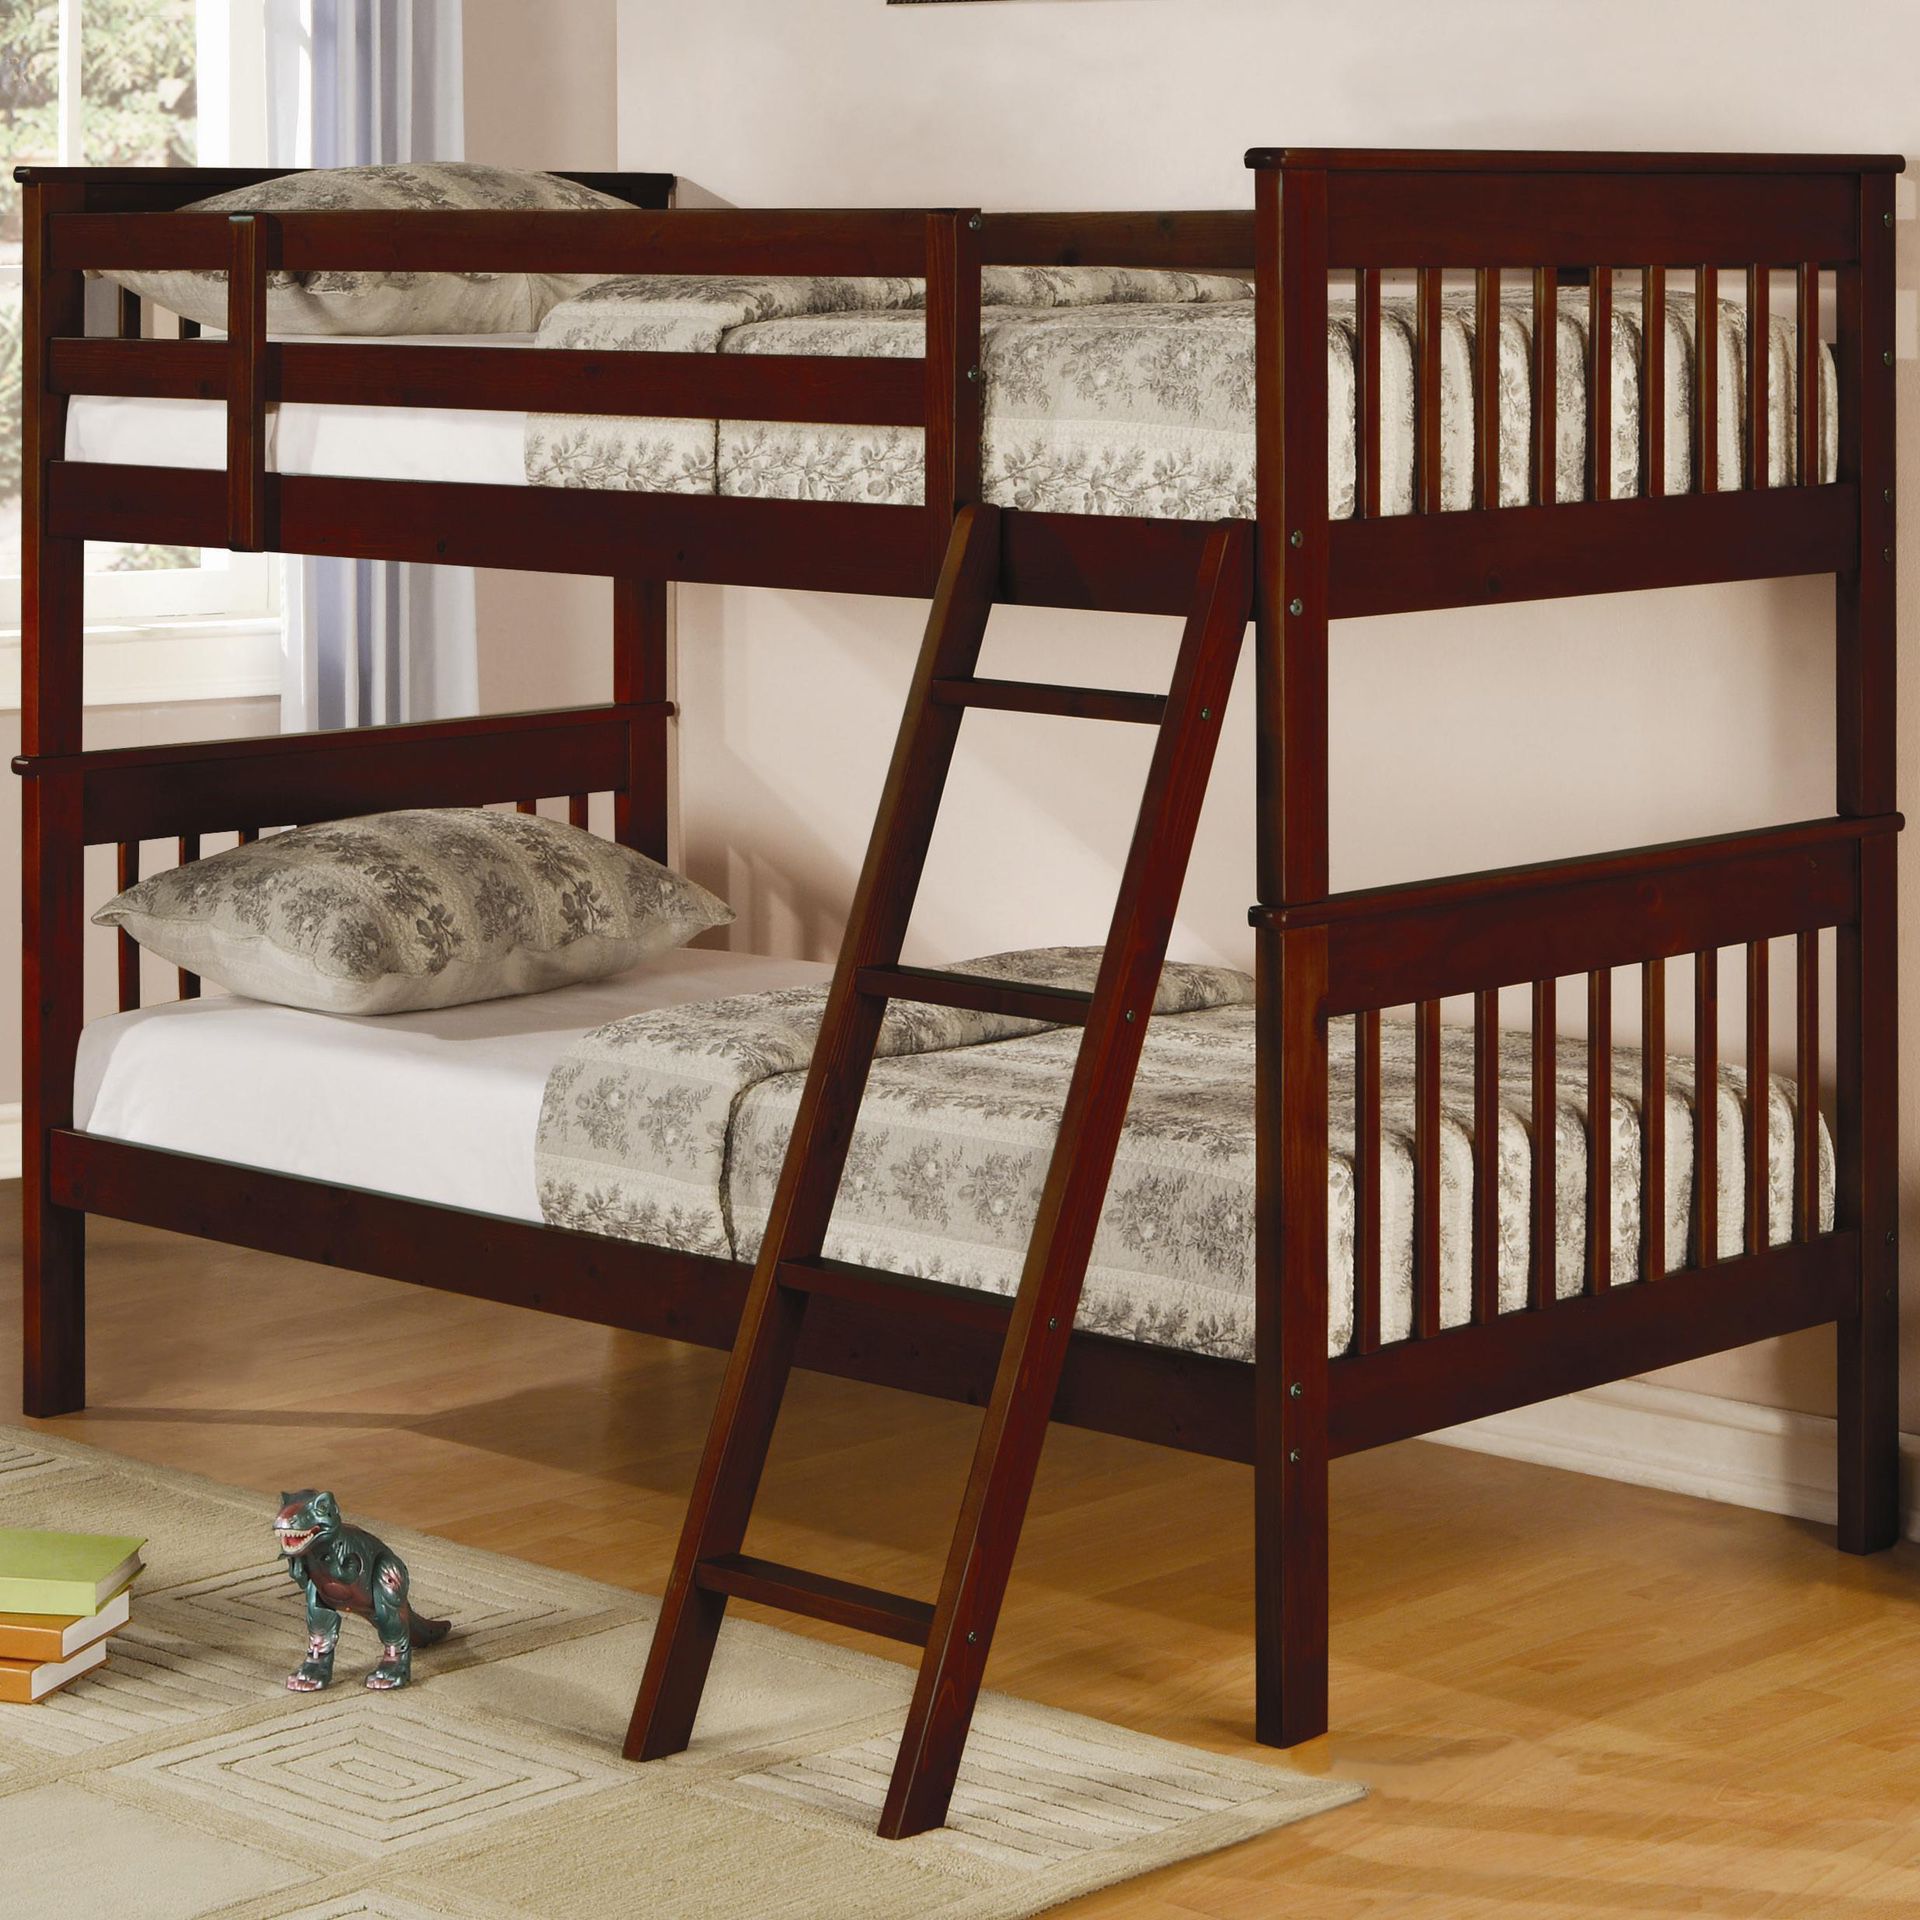 Twin bunk bed with ladder